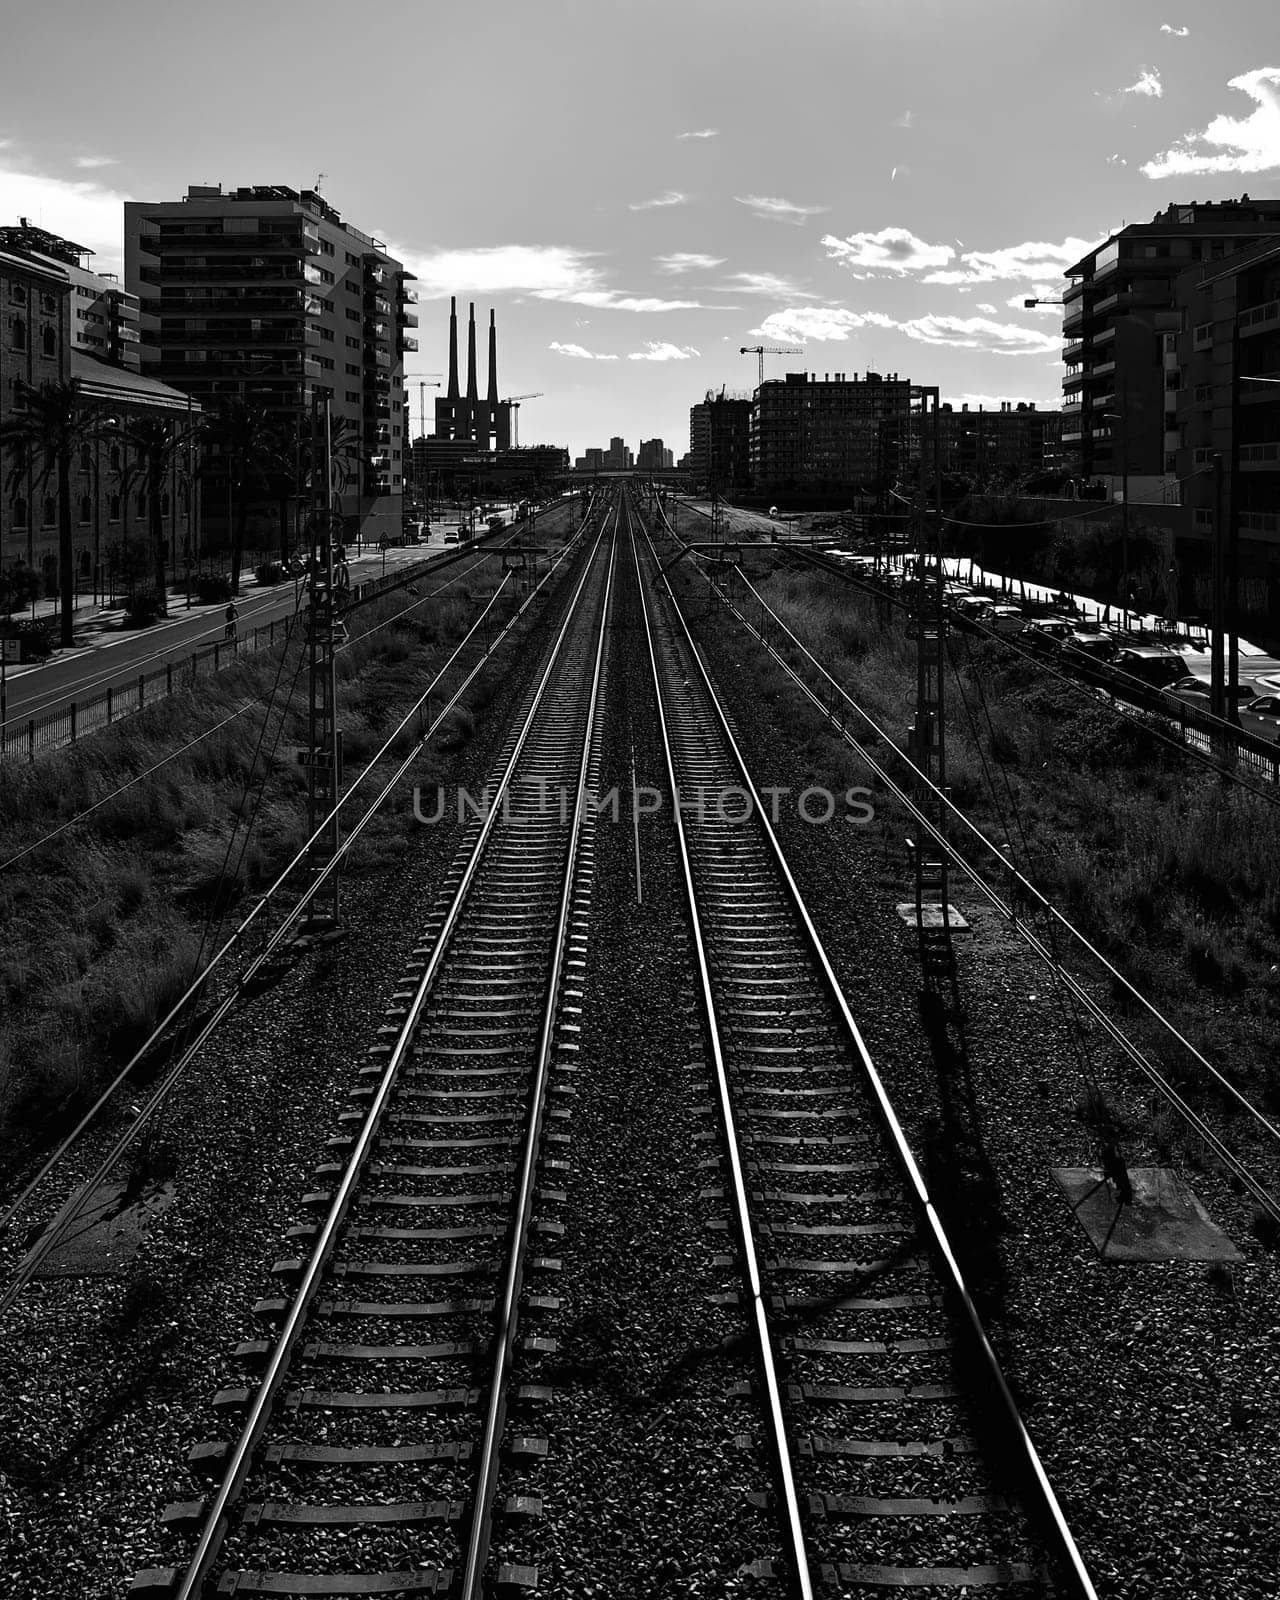 Railway tracks cutting through a city with buildings on both sides, under a cloudy sky